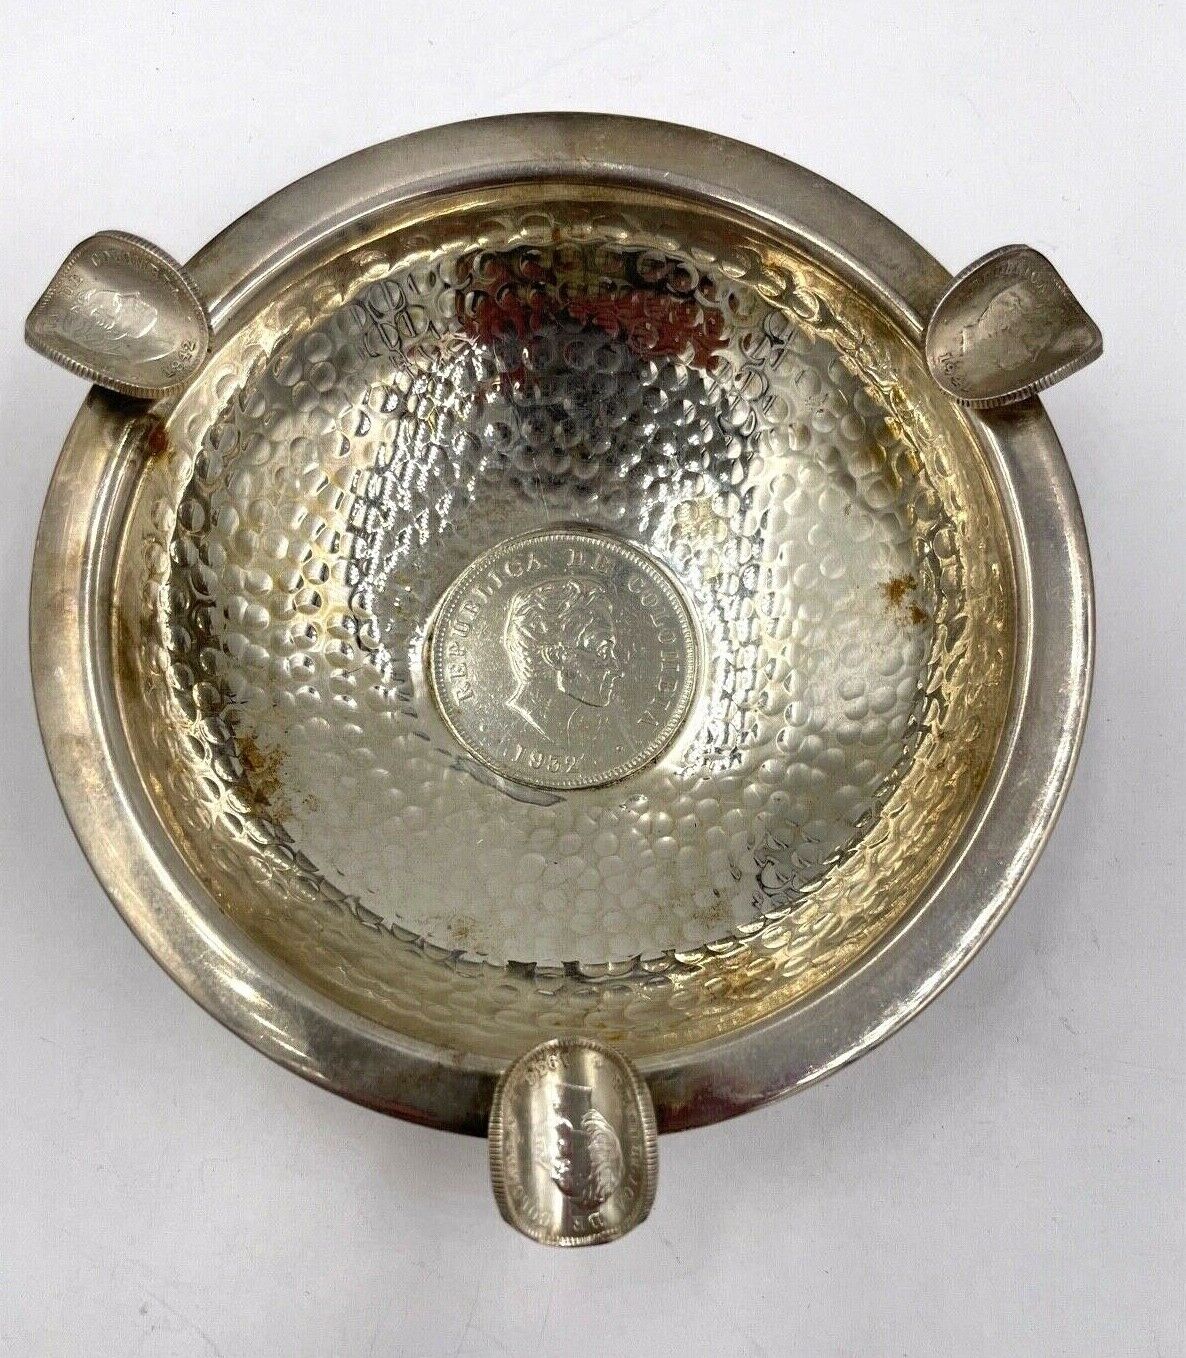 Antique Sterling Silver Ashtray or Plate, with Peru 1/2 Sol Silver coin  1907